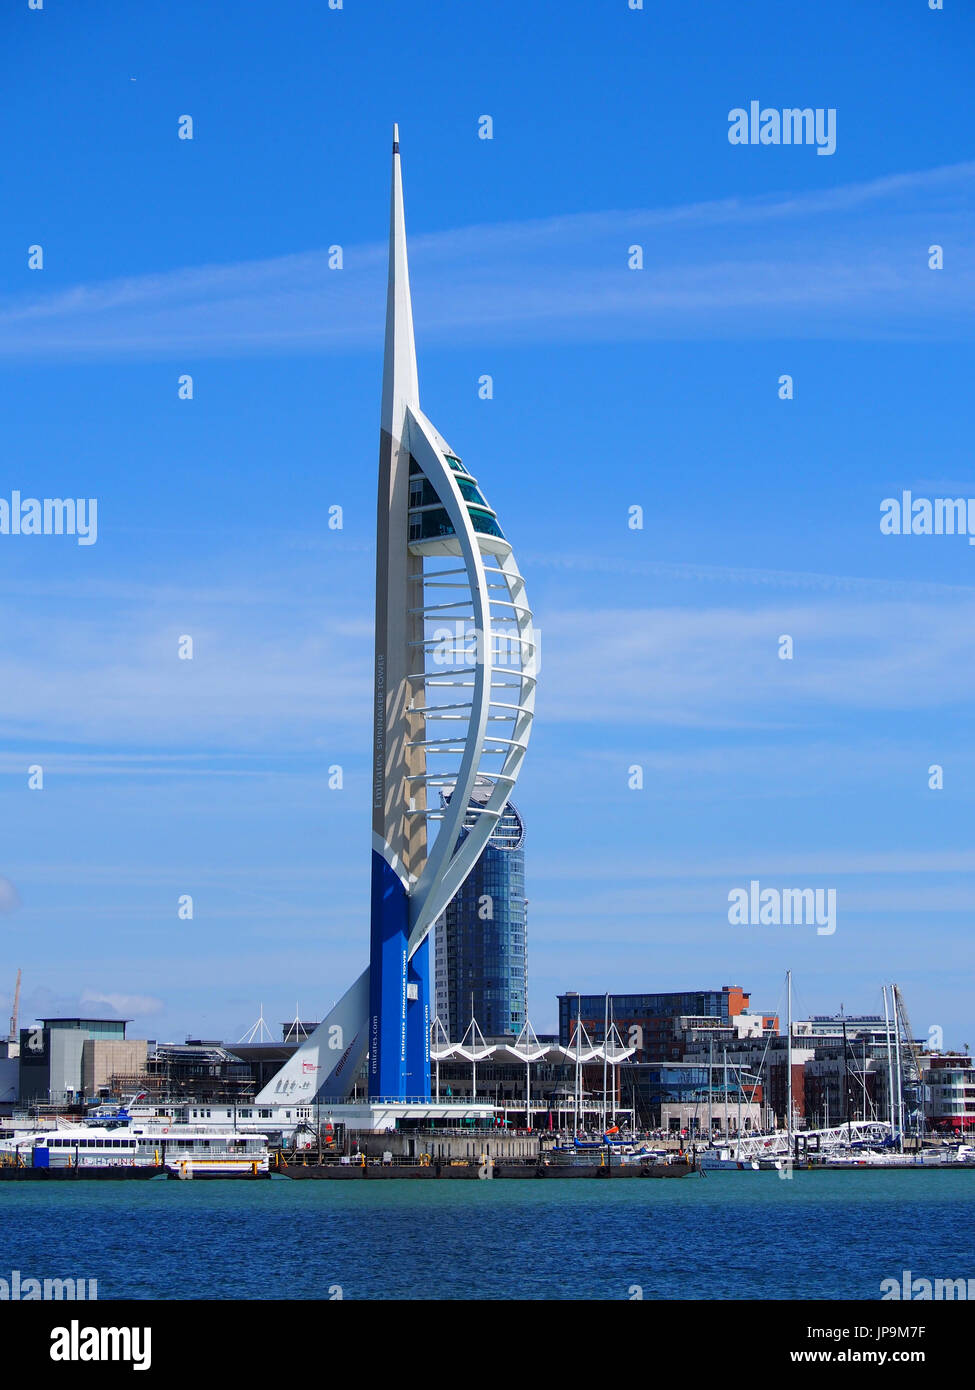 The Emirates Spinnaker Tower, Portsmouth, England Stock Photo